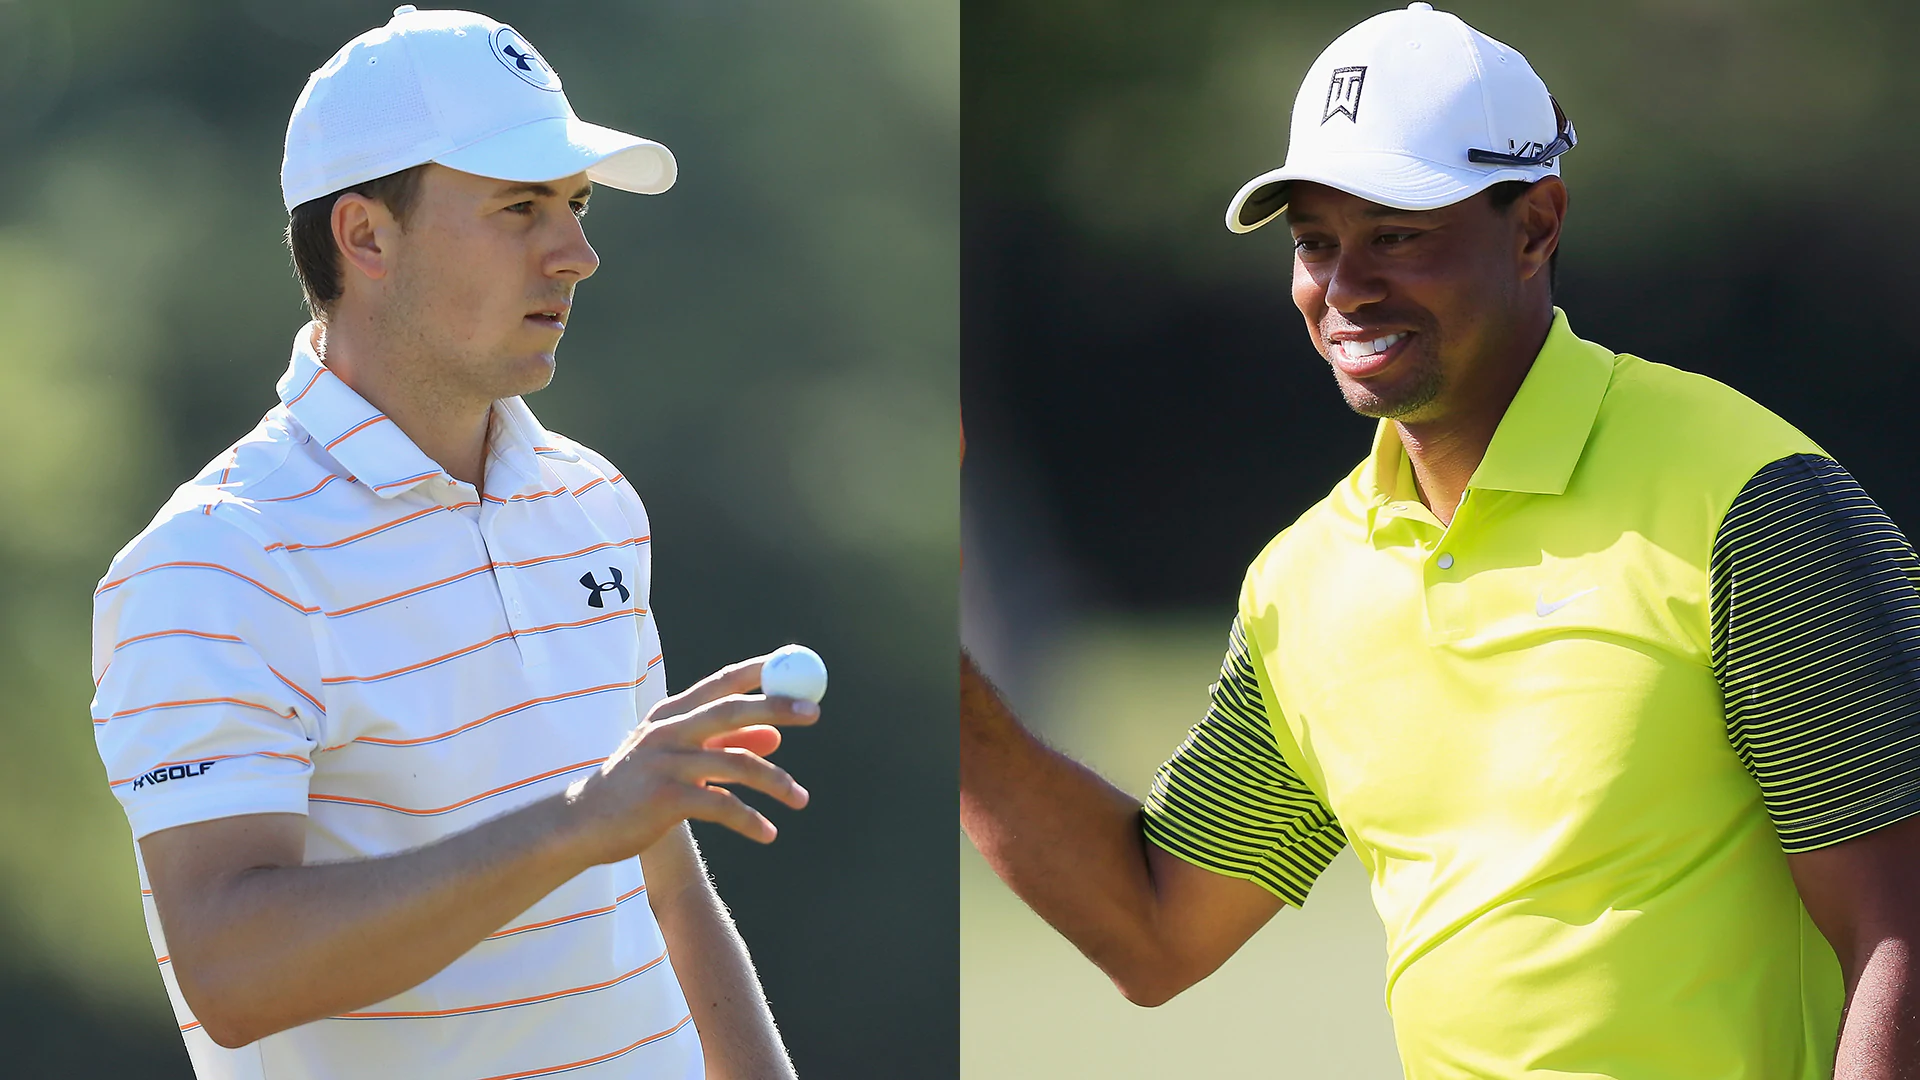 Watch: Spieth, Woods have both made 91-foot putts 8